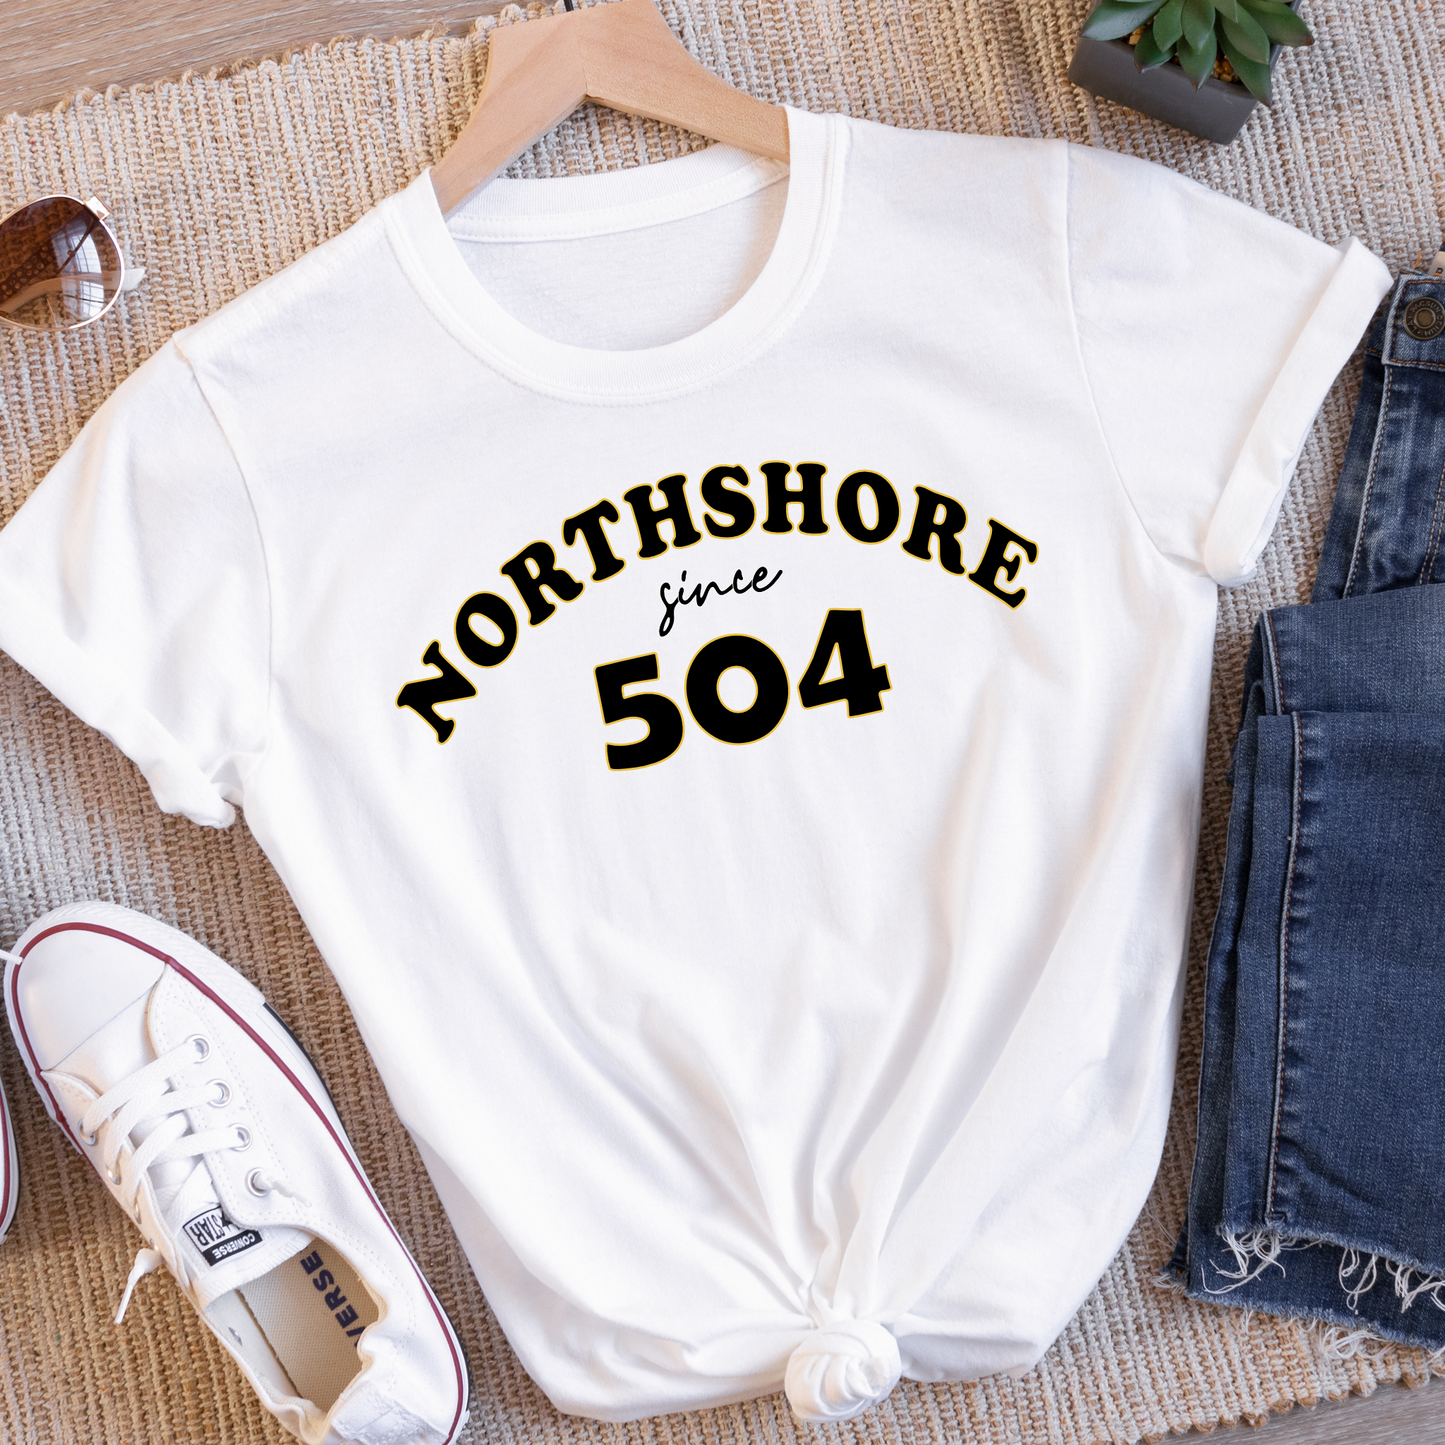 Northshore SINCE 504 - Short and Long Sleeve Tee